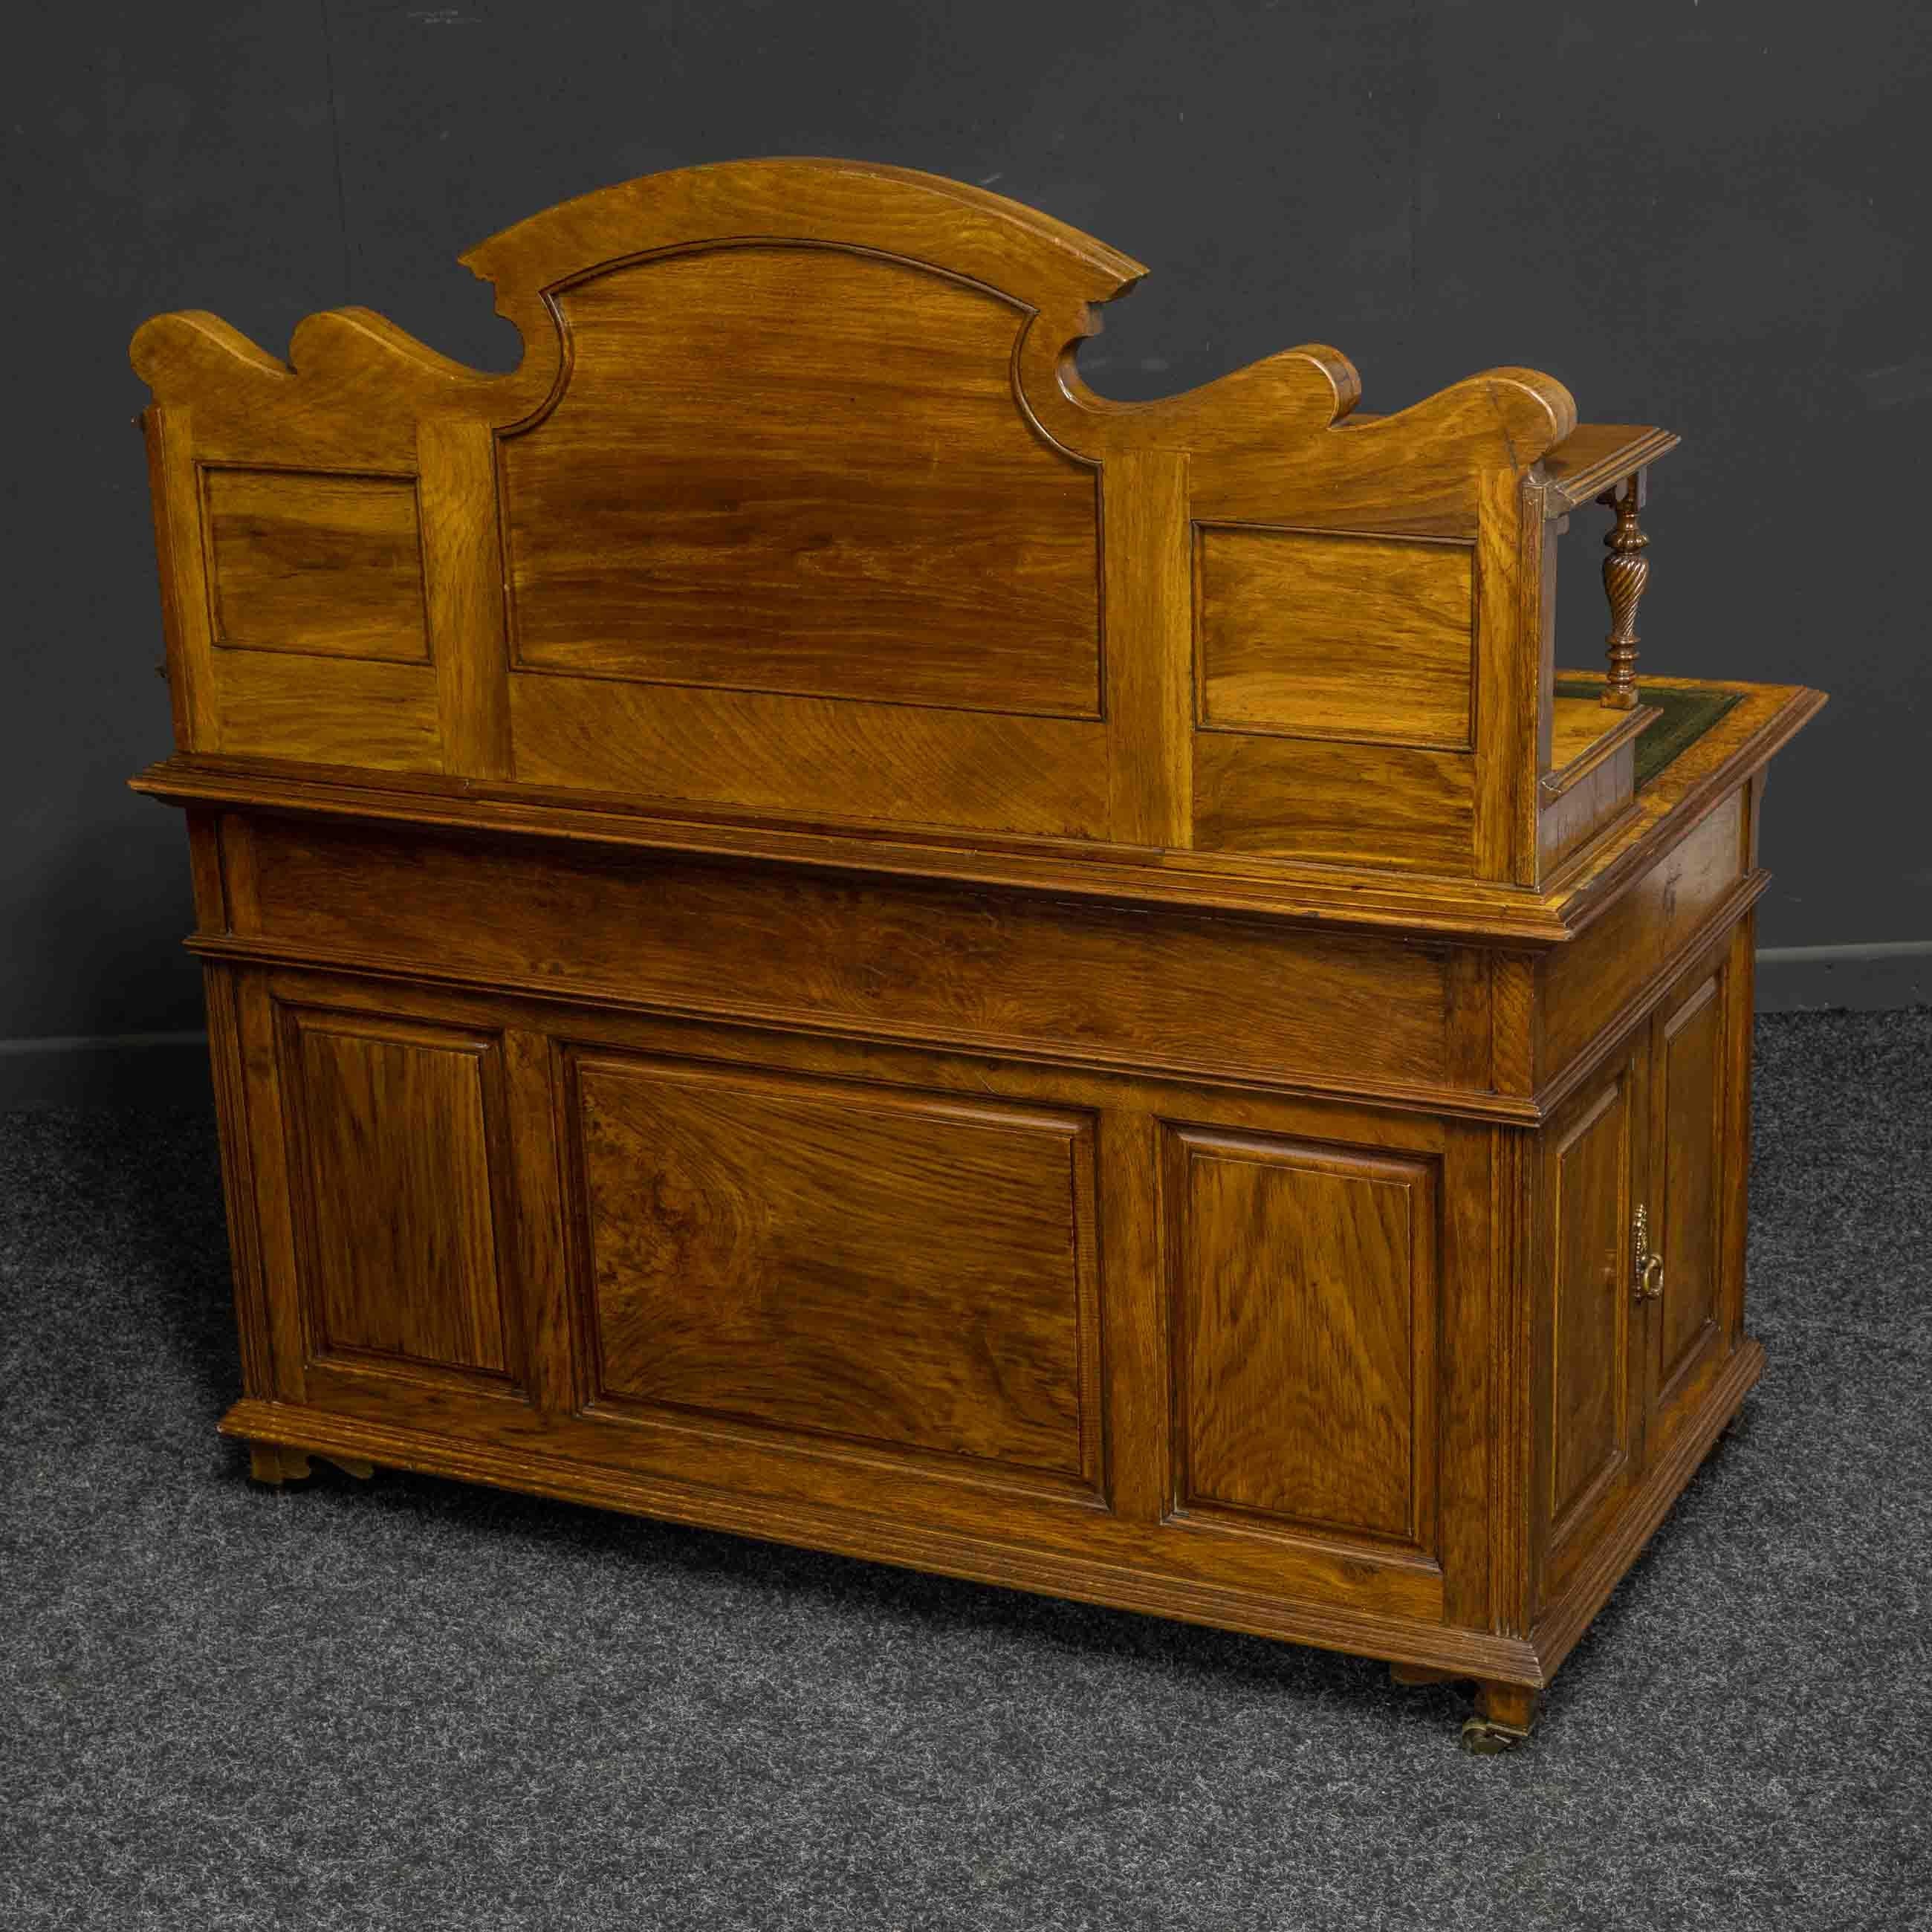 19th Century Late Victorian Pollard Oak Desk by Thomas Turner of Manchester, England For Sale